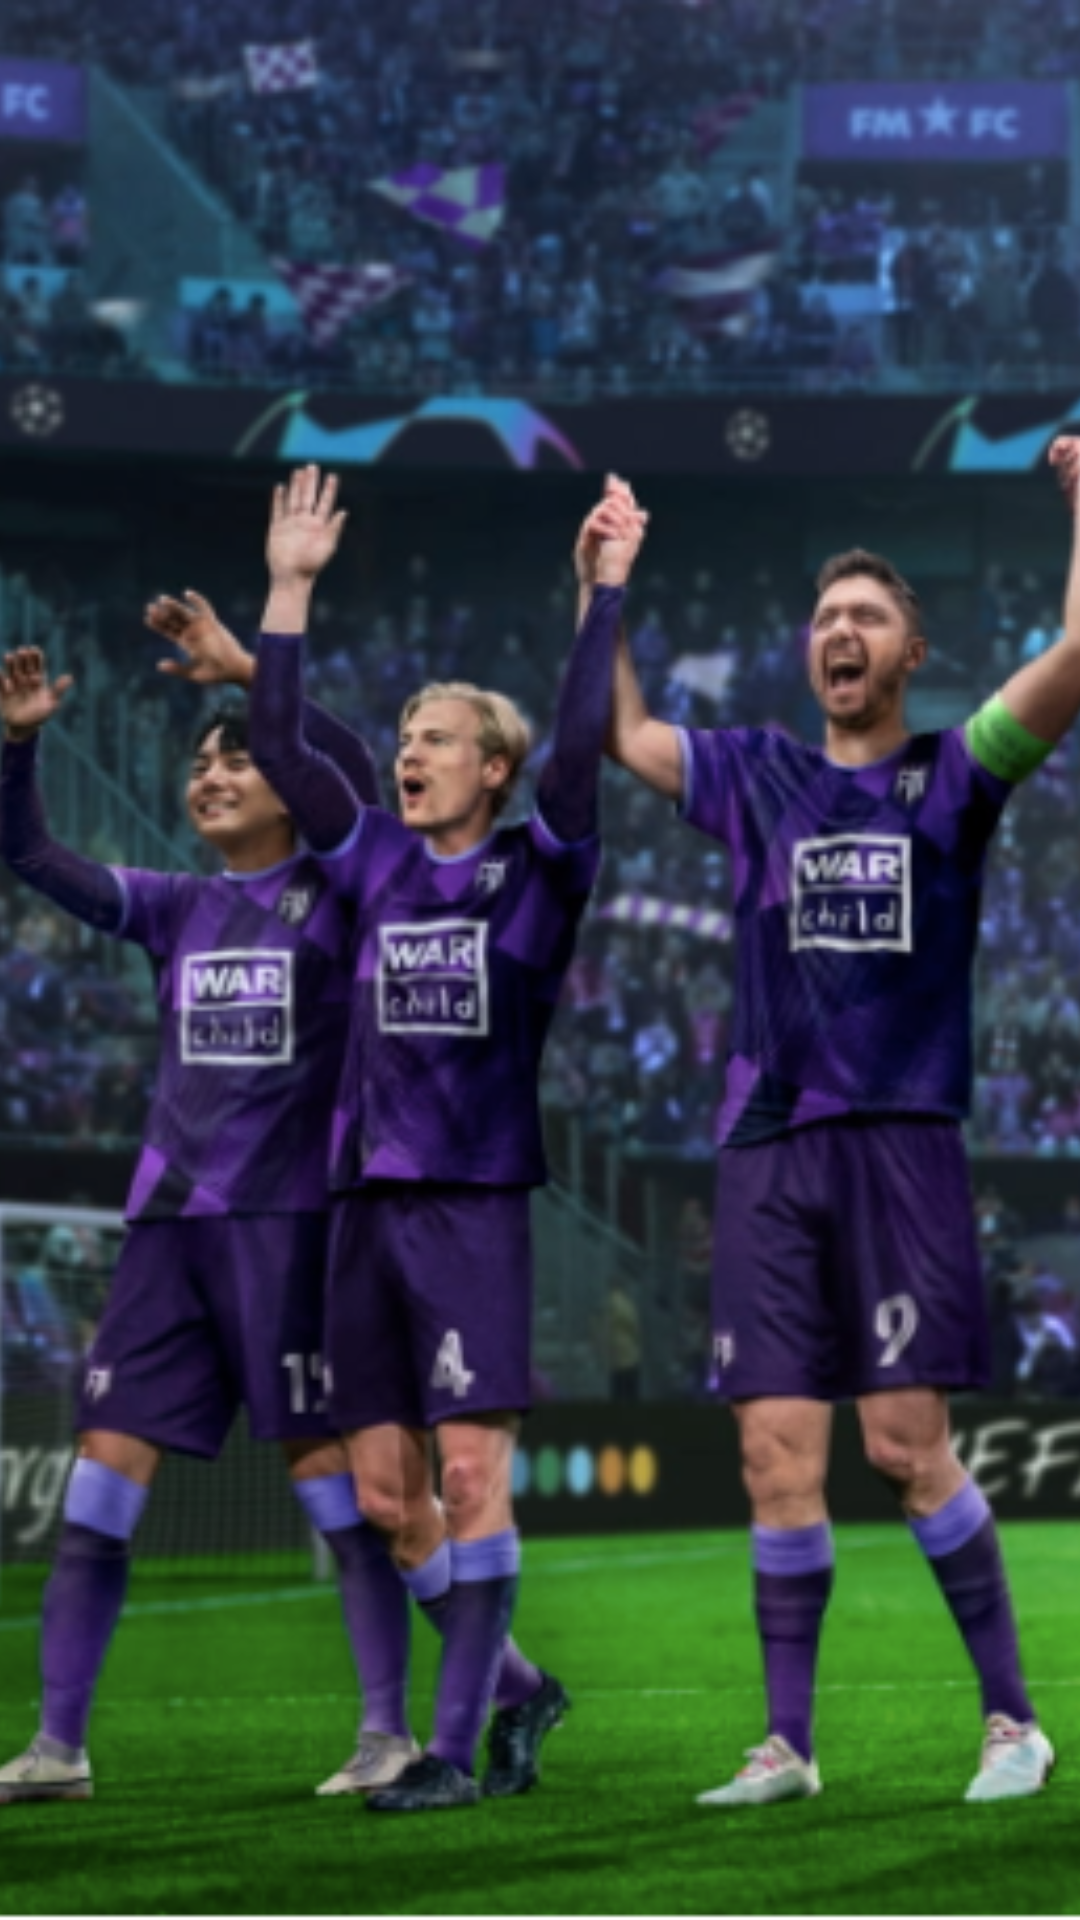 Wario64 on X: Football Manager 2023 (EGS) is free on Prime Gaming